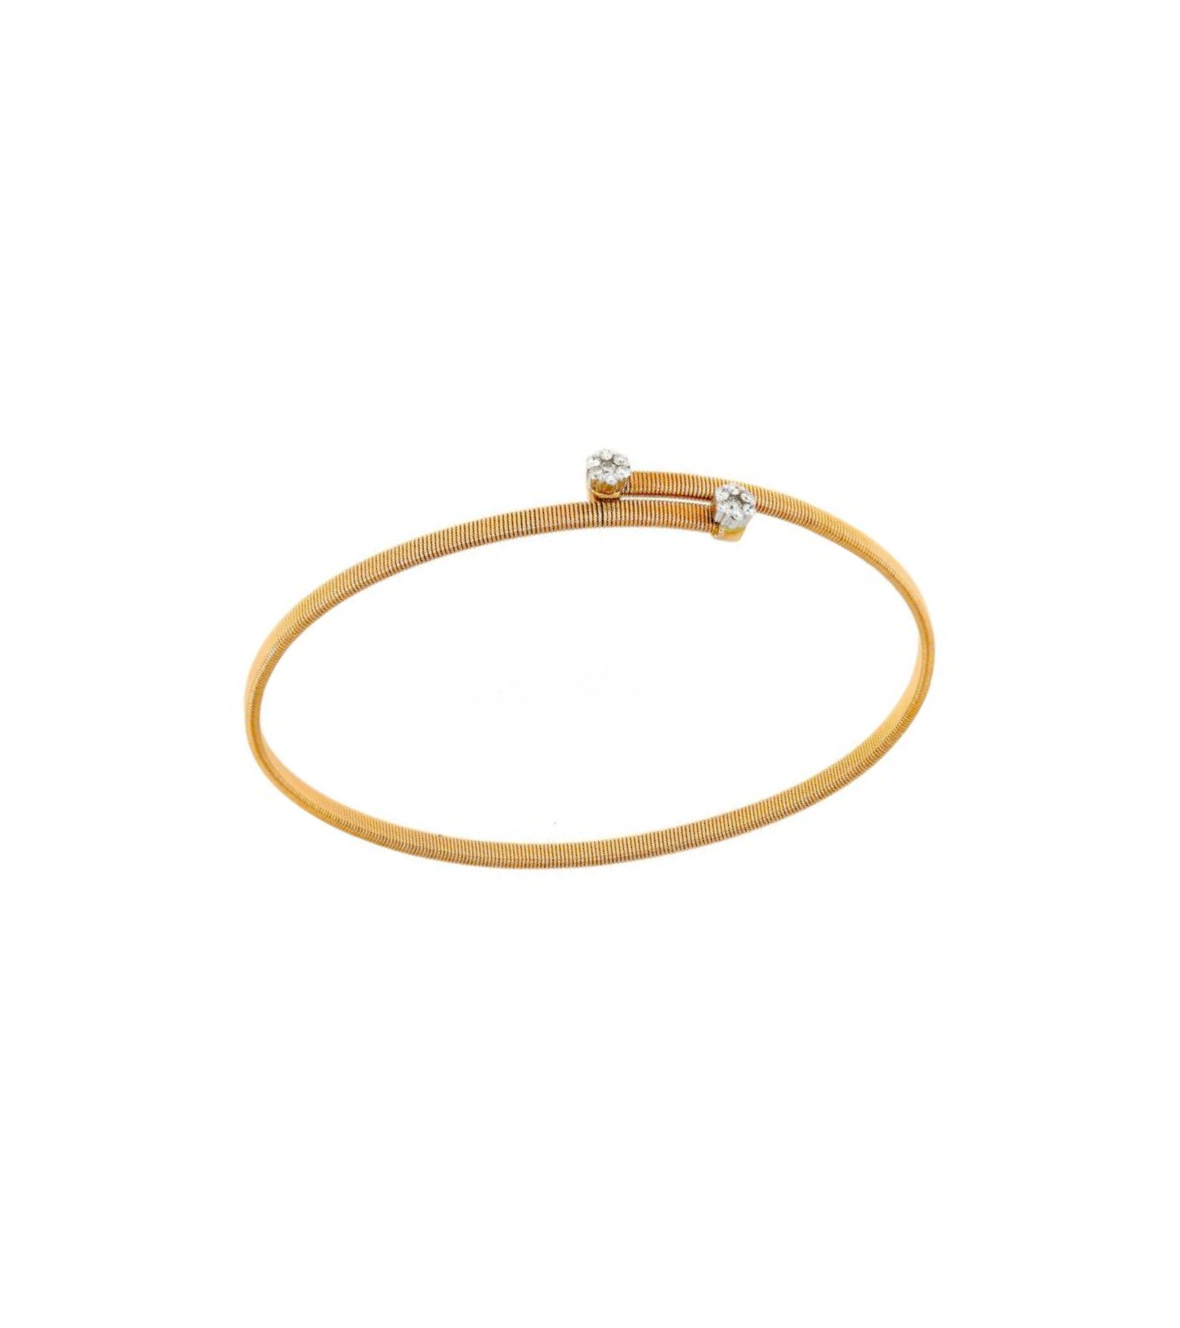 Pink Gold Bracelet with Diamonds 01927 by Mentis Collection